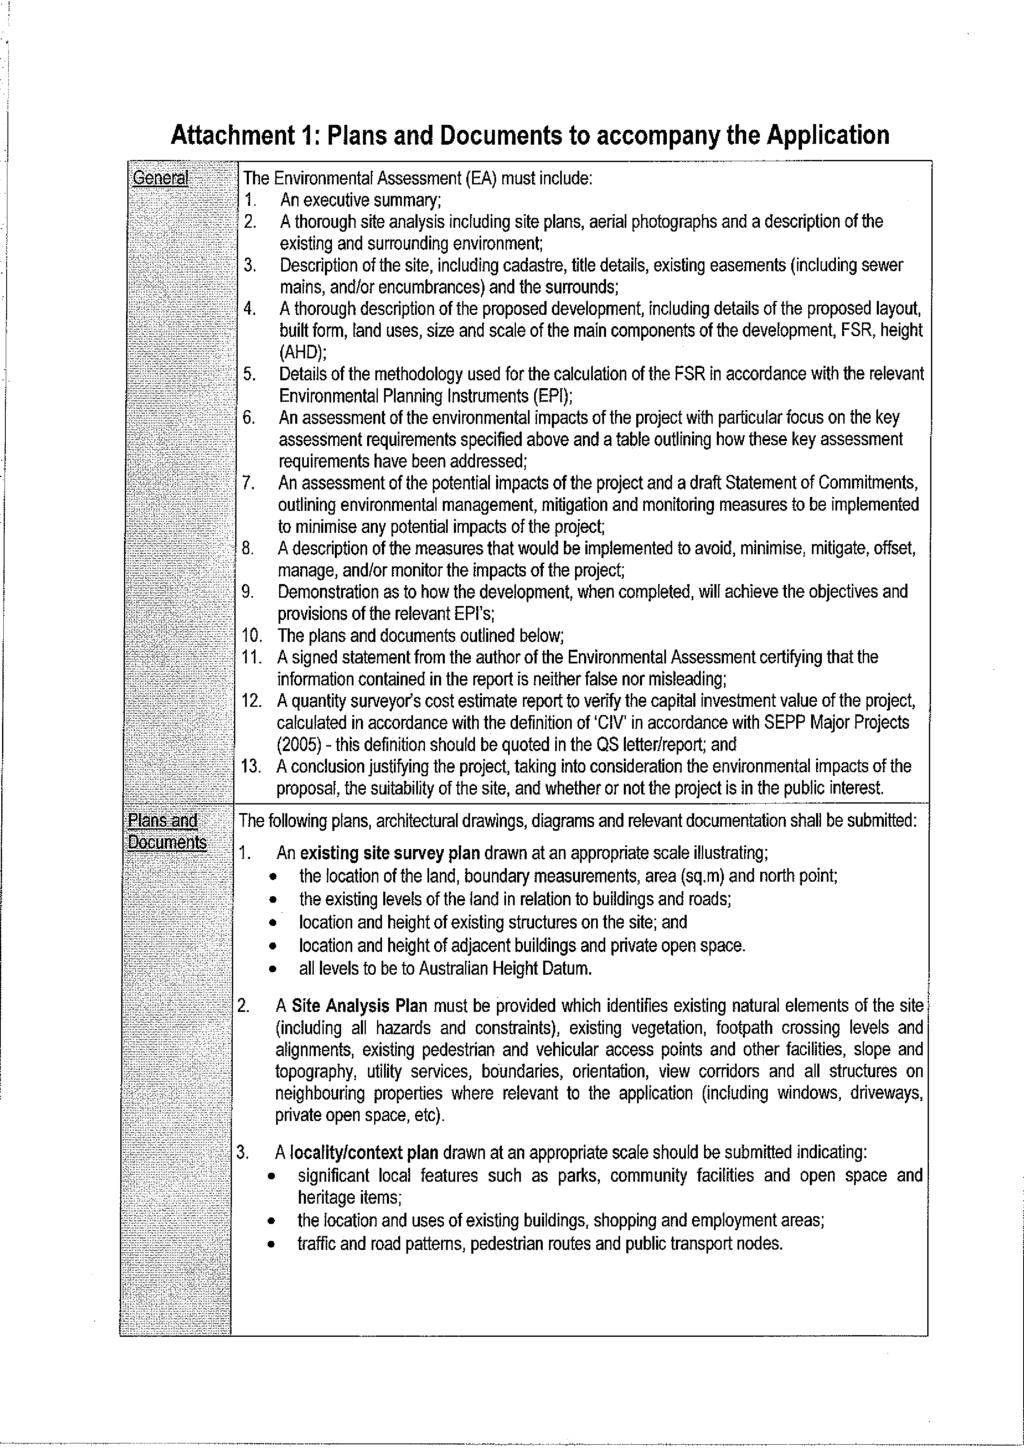 Attachment 1: Plans and Documents to accompany the Application General Plans Documents and The Environmental Assessment (EA) must include: 1. An executive summary; 2.